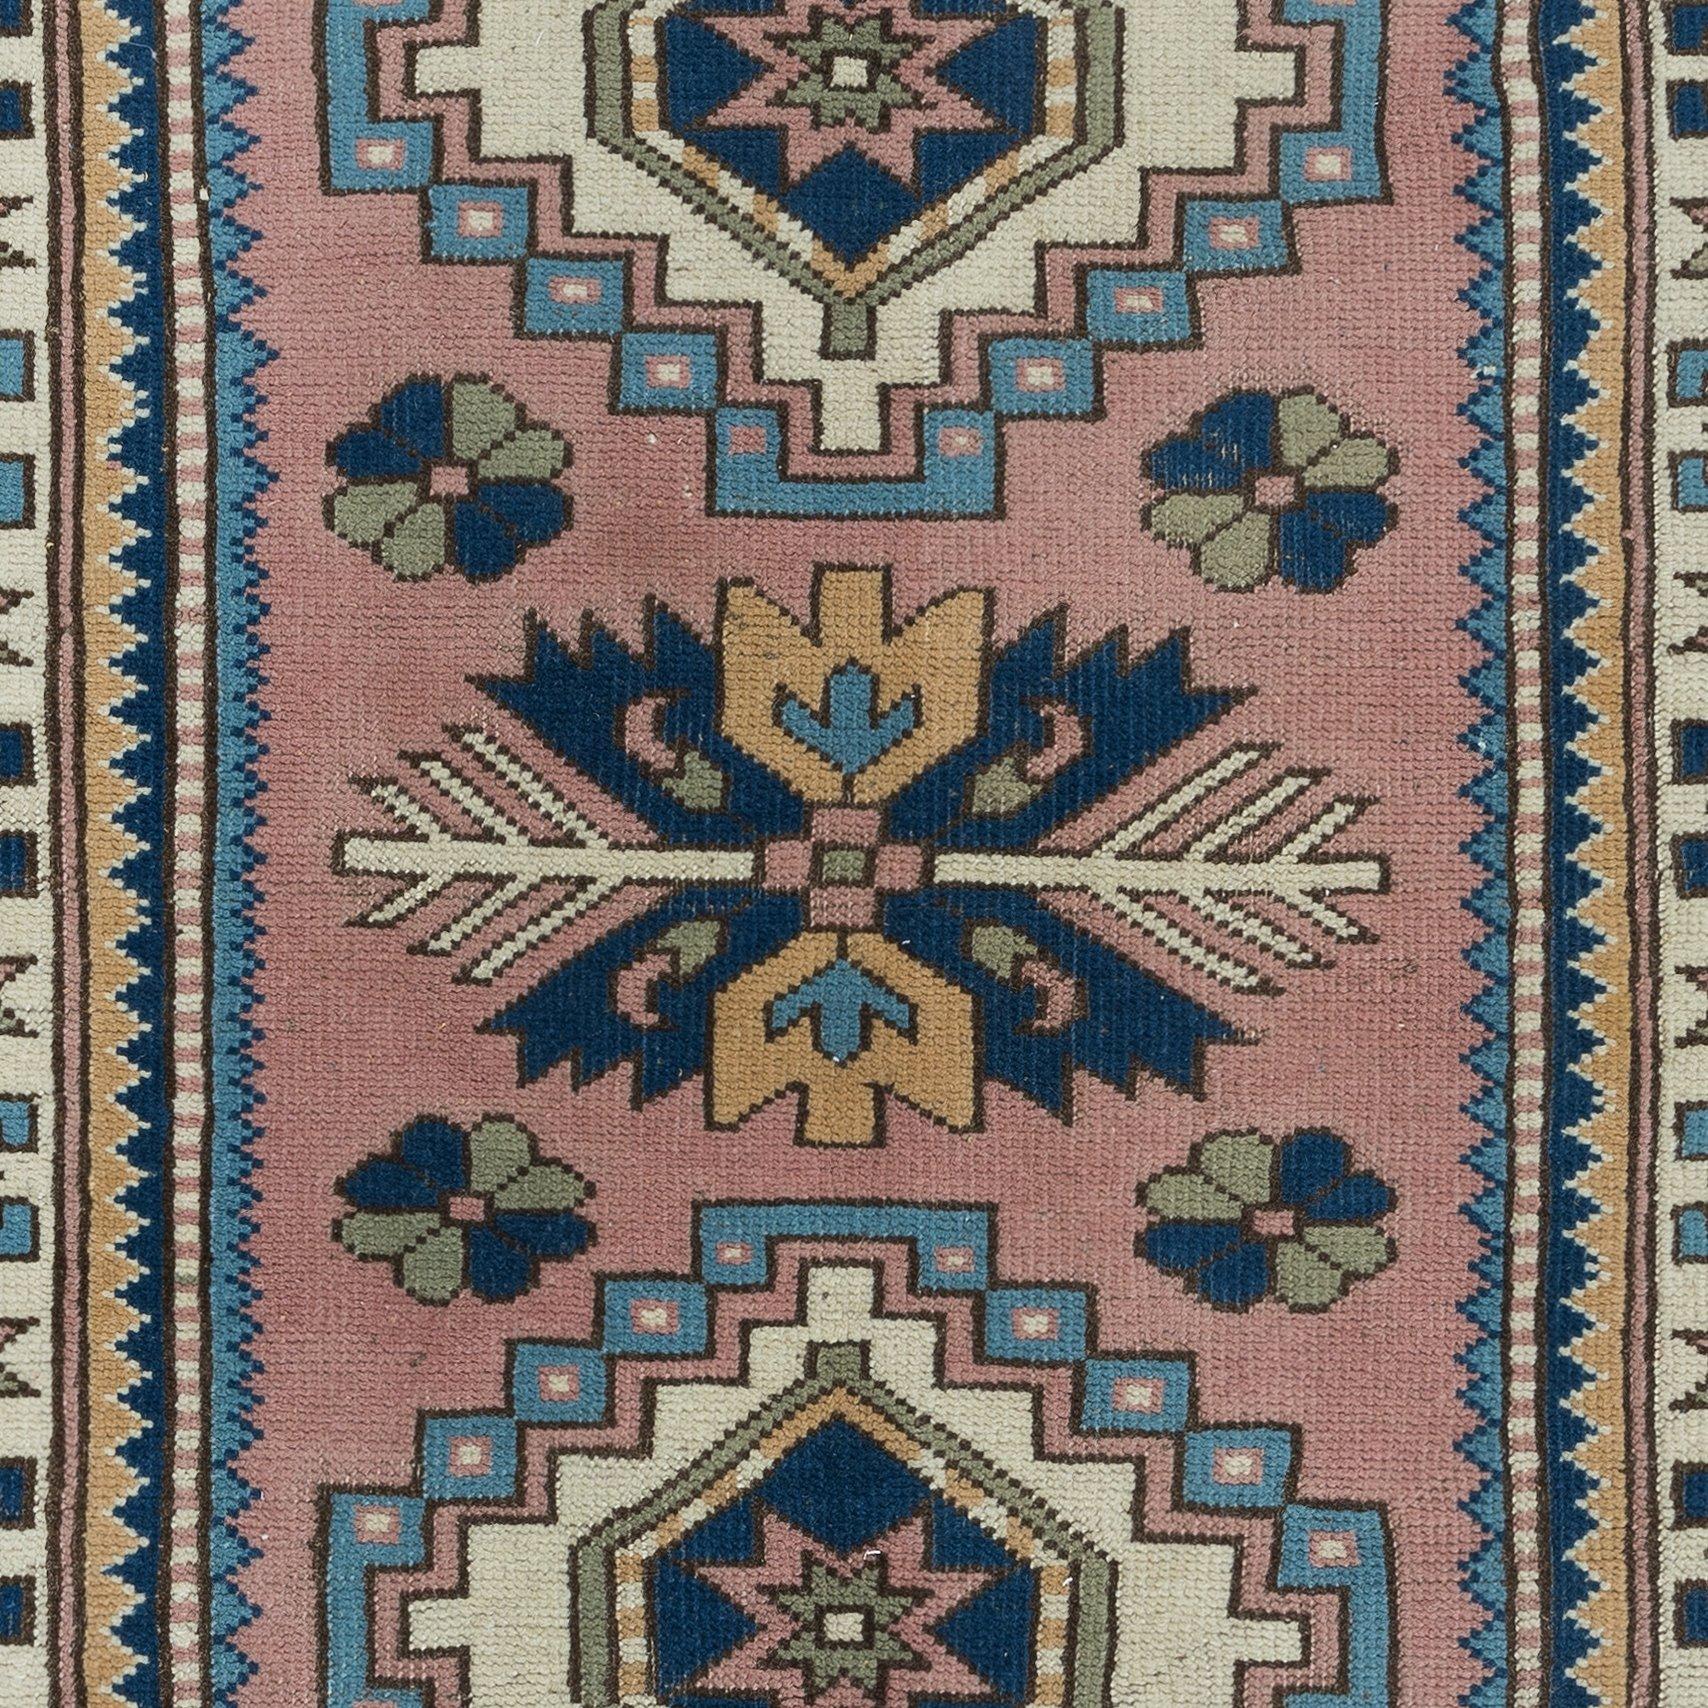 3.5x5 Ft One of a Kind Vintage Handmade Turkish Geometric Accent Rug, 100% Wool In Good Condition For Sale In Philadelphia, PA